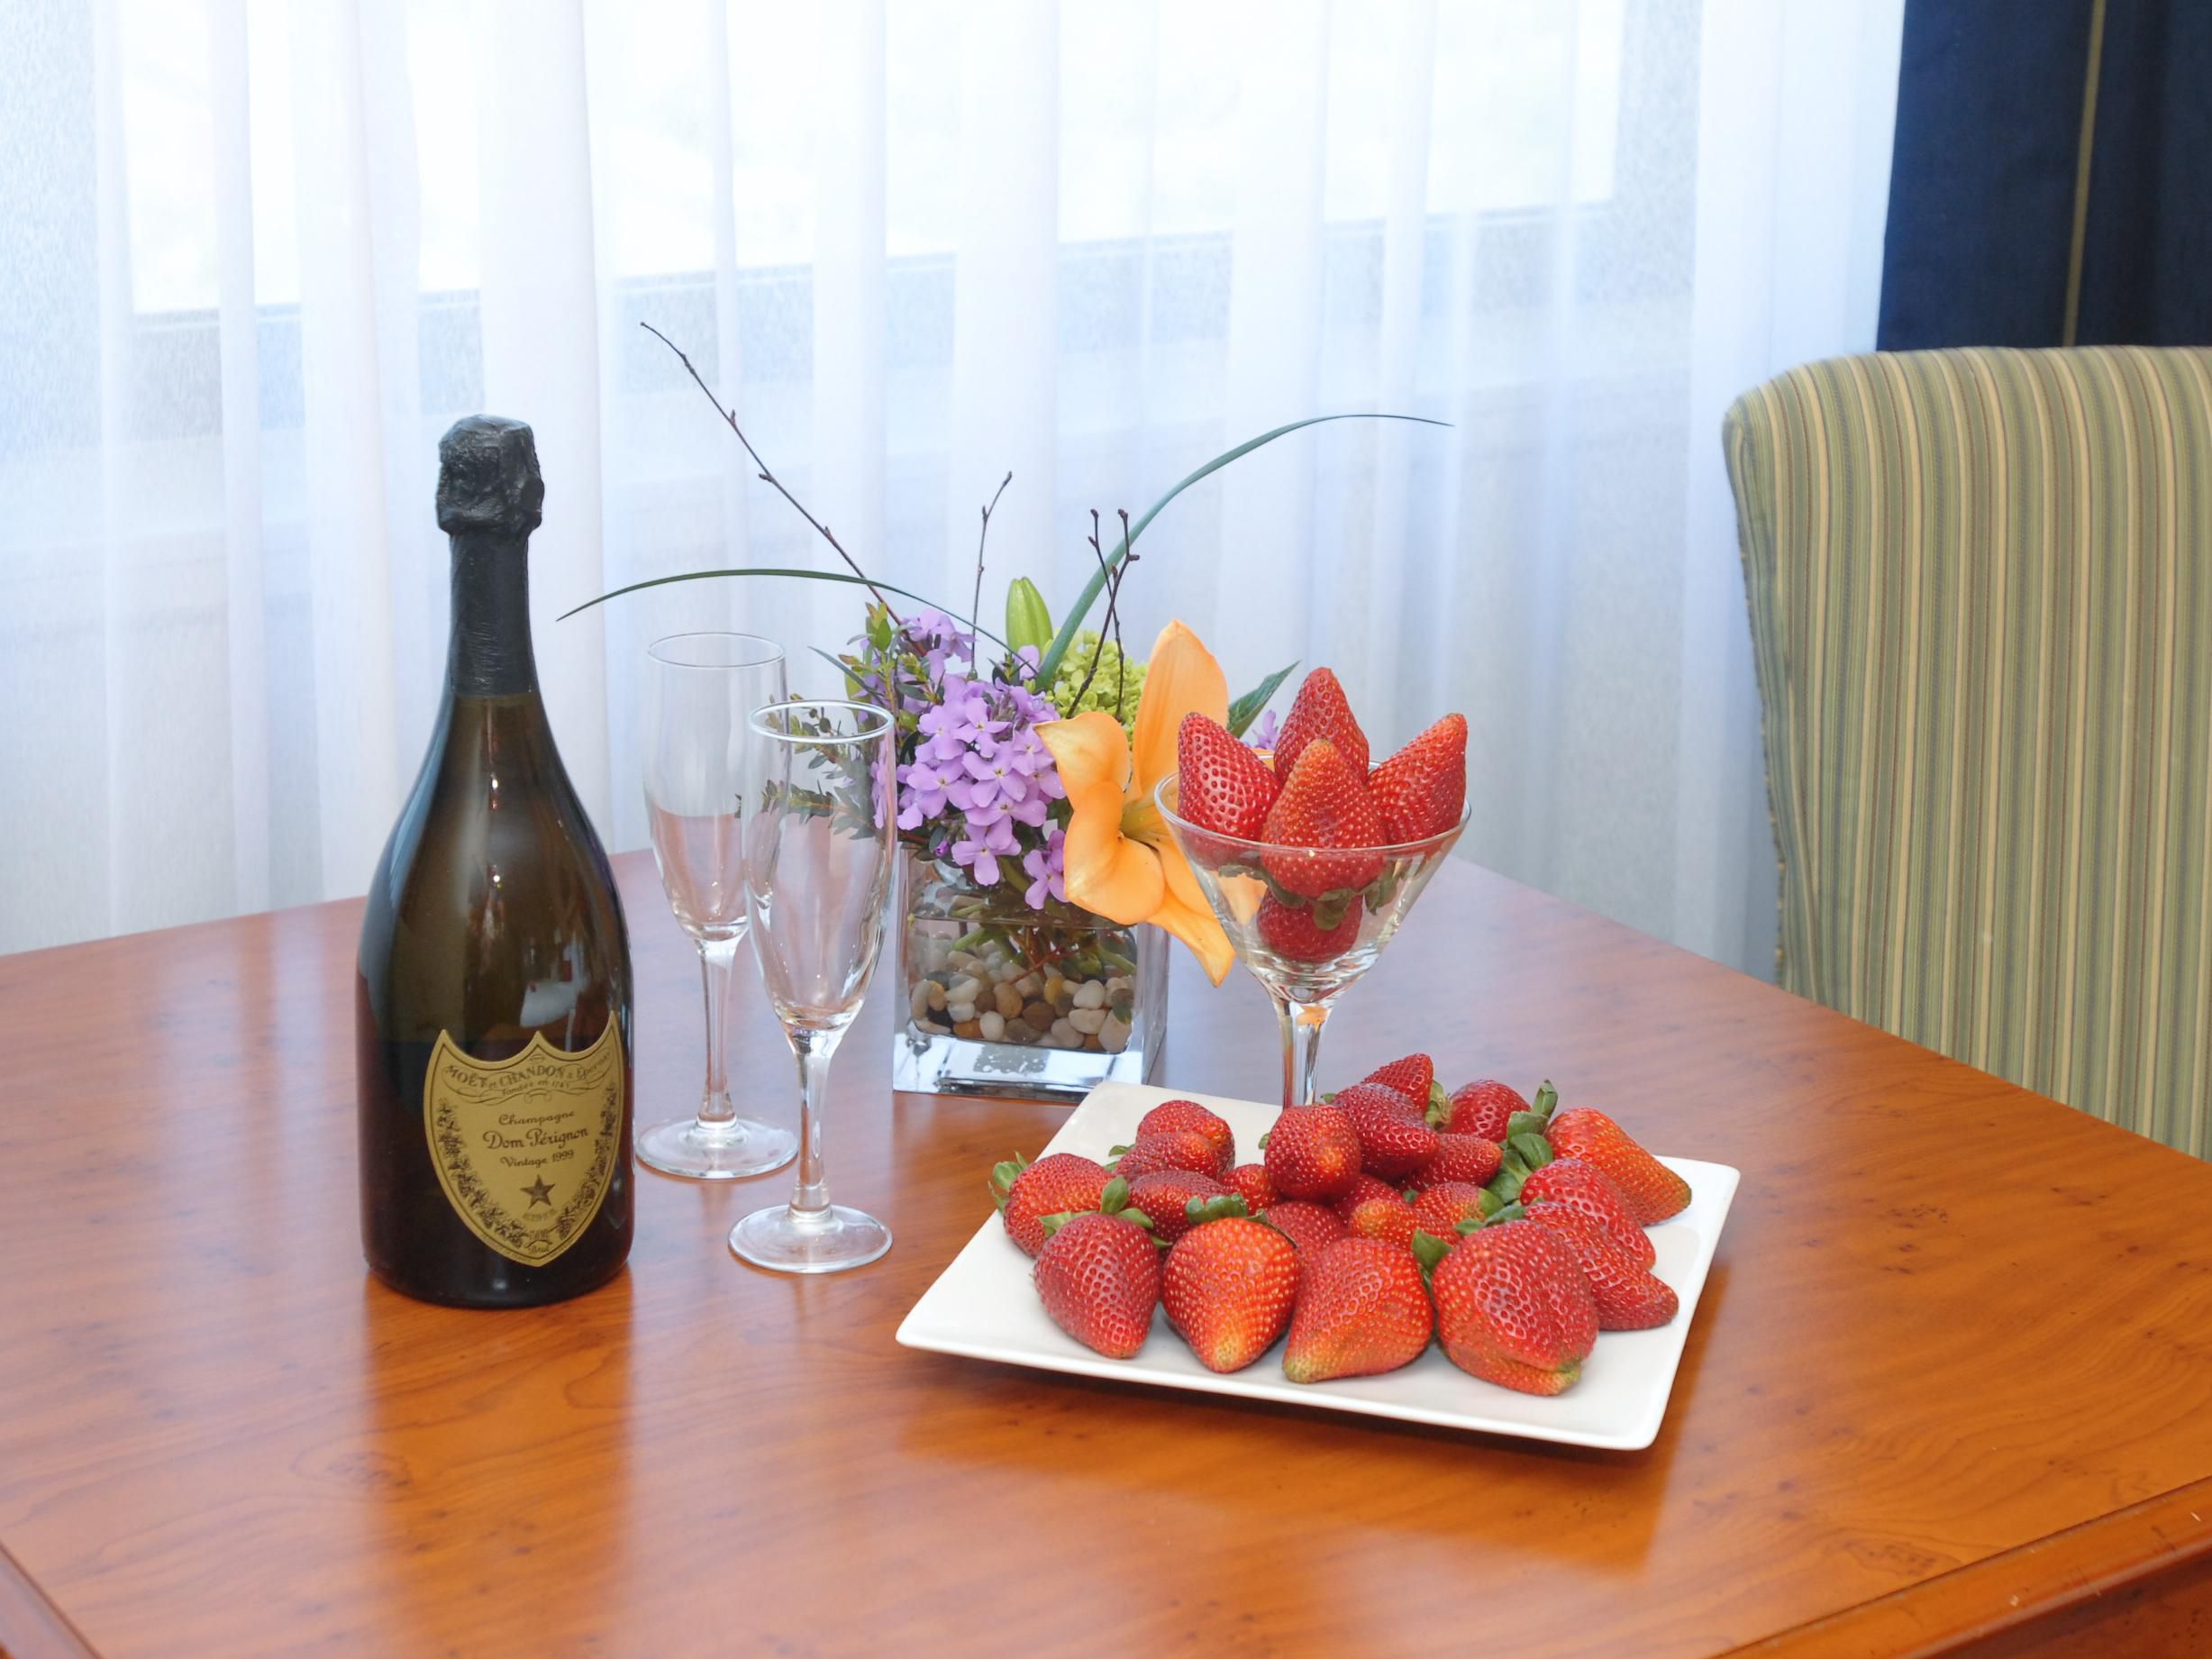 Room Service can help you celebrate a birthday or anniversary